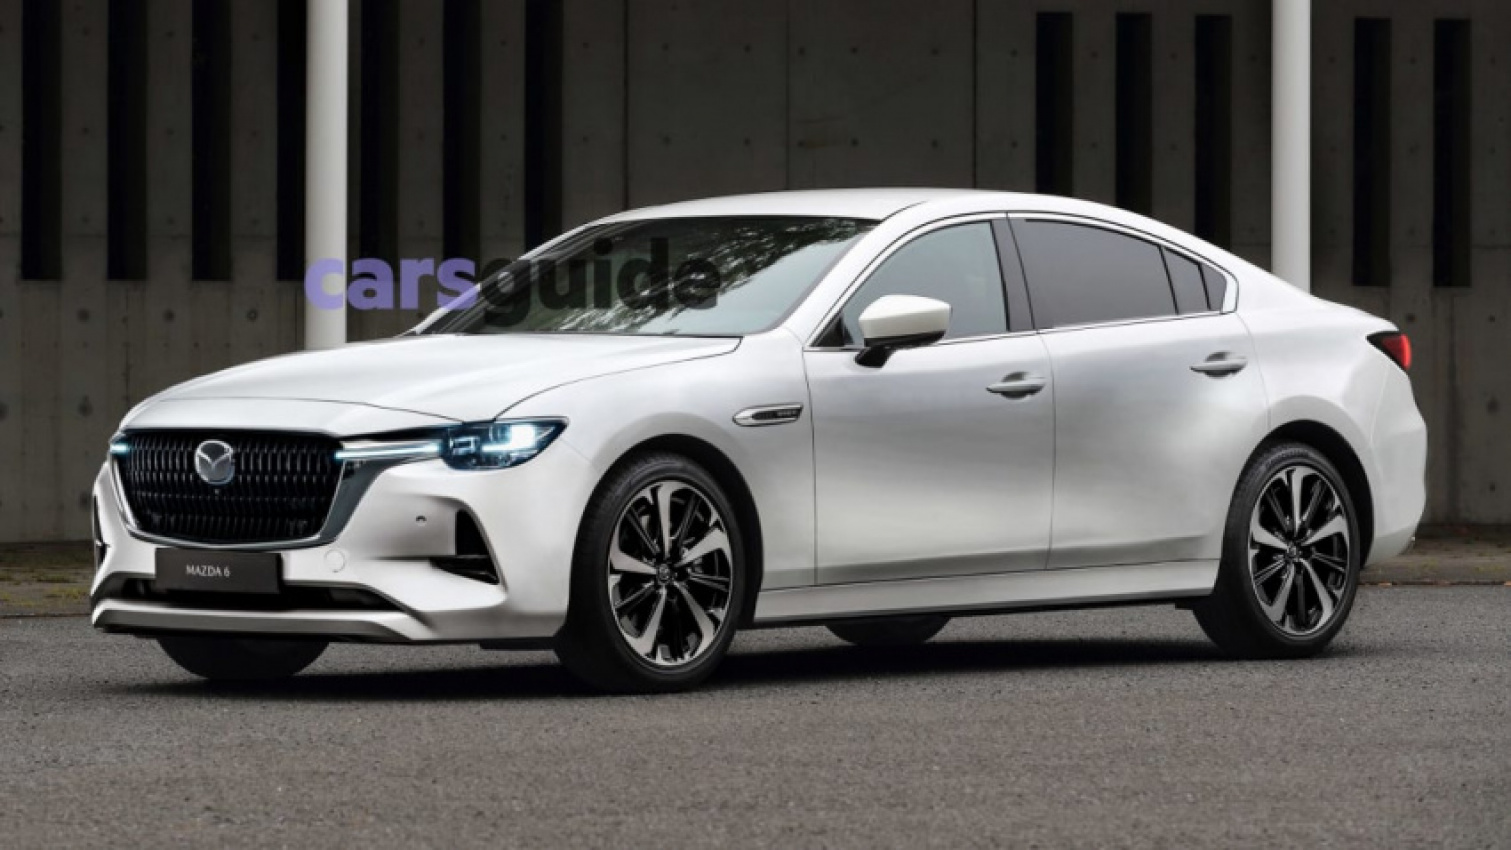 autos, bmw, cars, mazda, mercedes-benz, family cars, industry news, mazda 6 2022, mazda news, mazda sedan range, mercedes, prestige & luxury cars, showroom news, why the next mazda6 needs to take on the bmw 3-series, mercedes-benz c-class and others | opinion